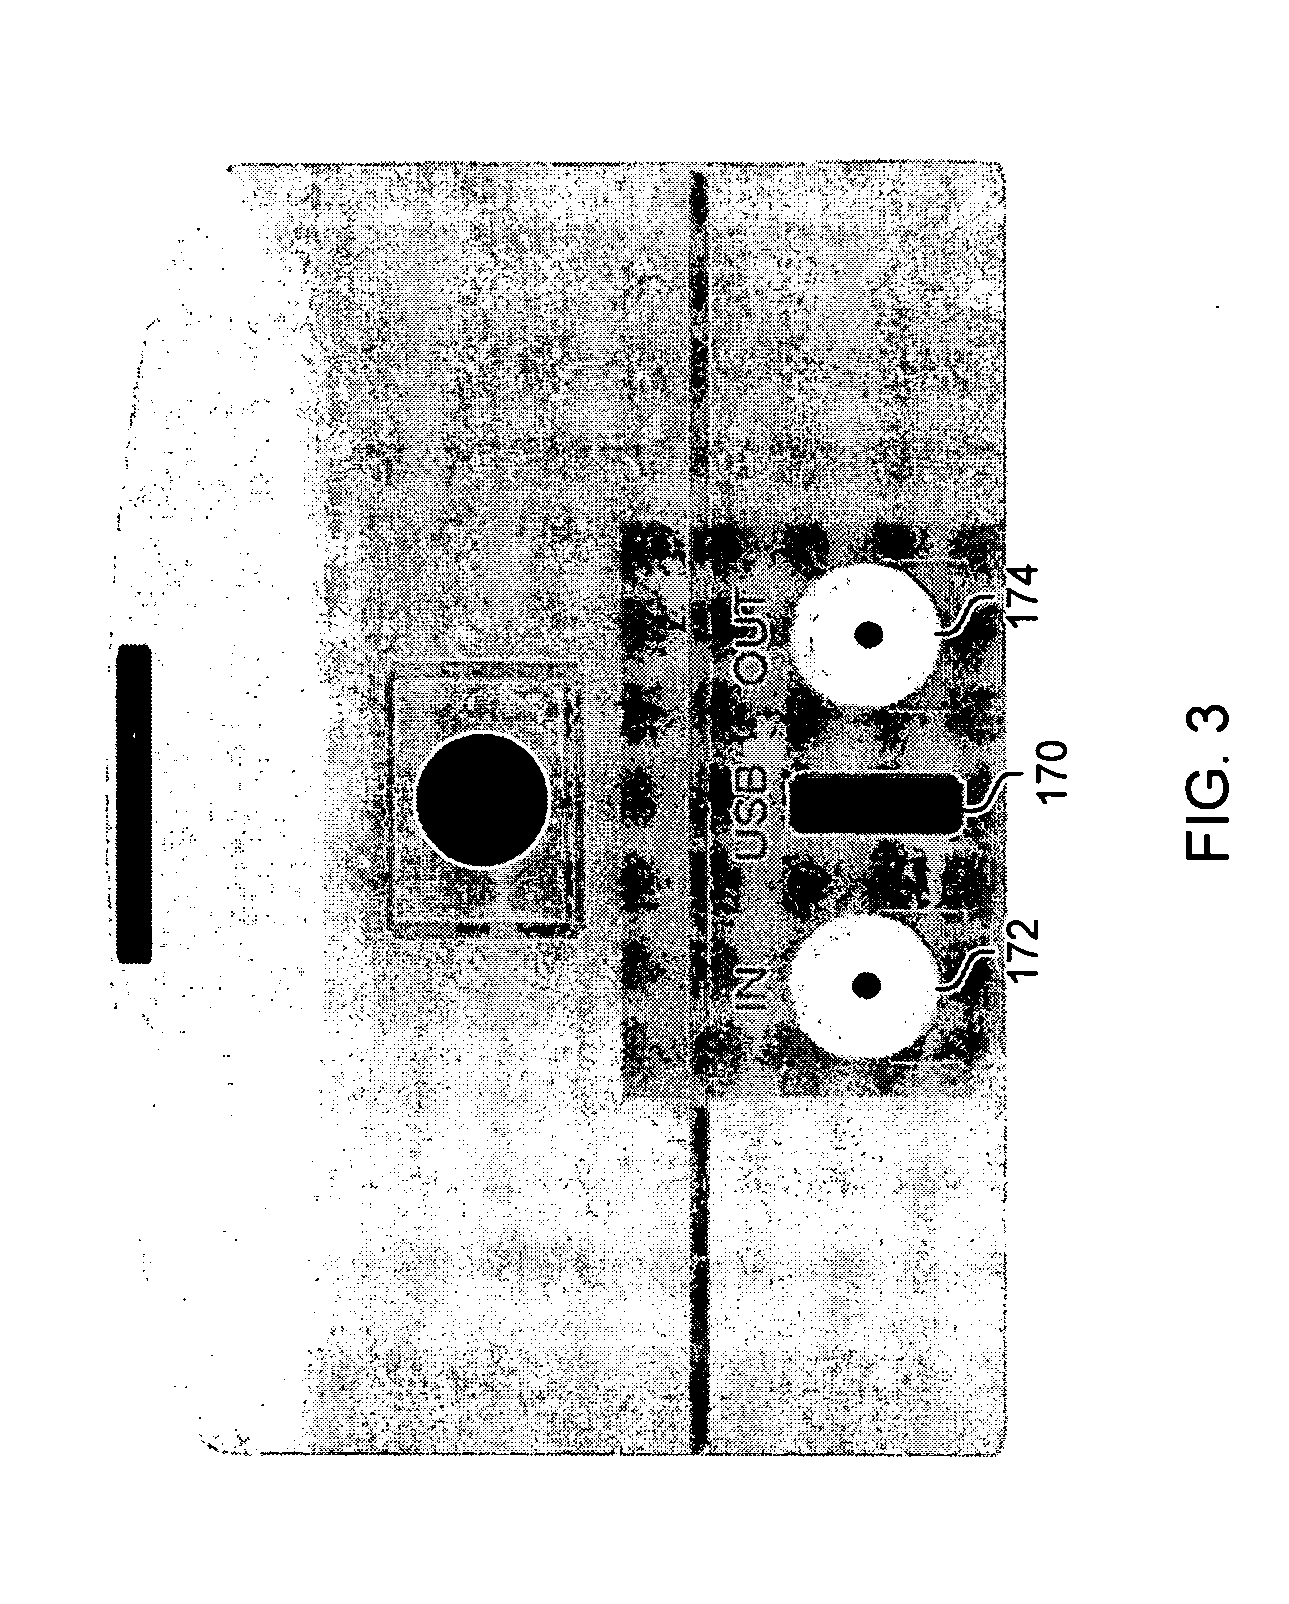 Automatic sensing power systems and methods